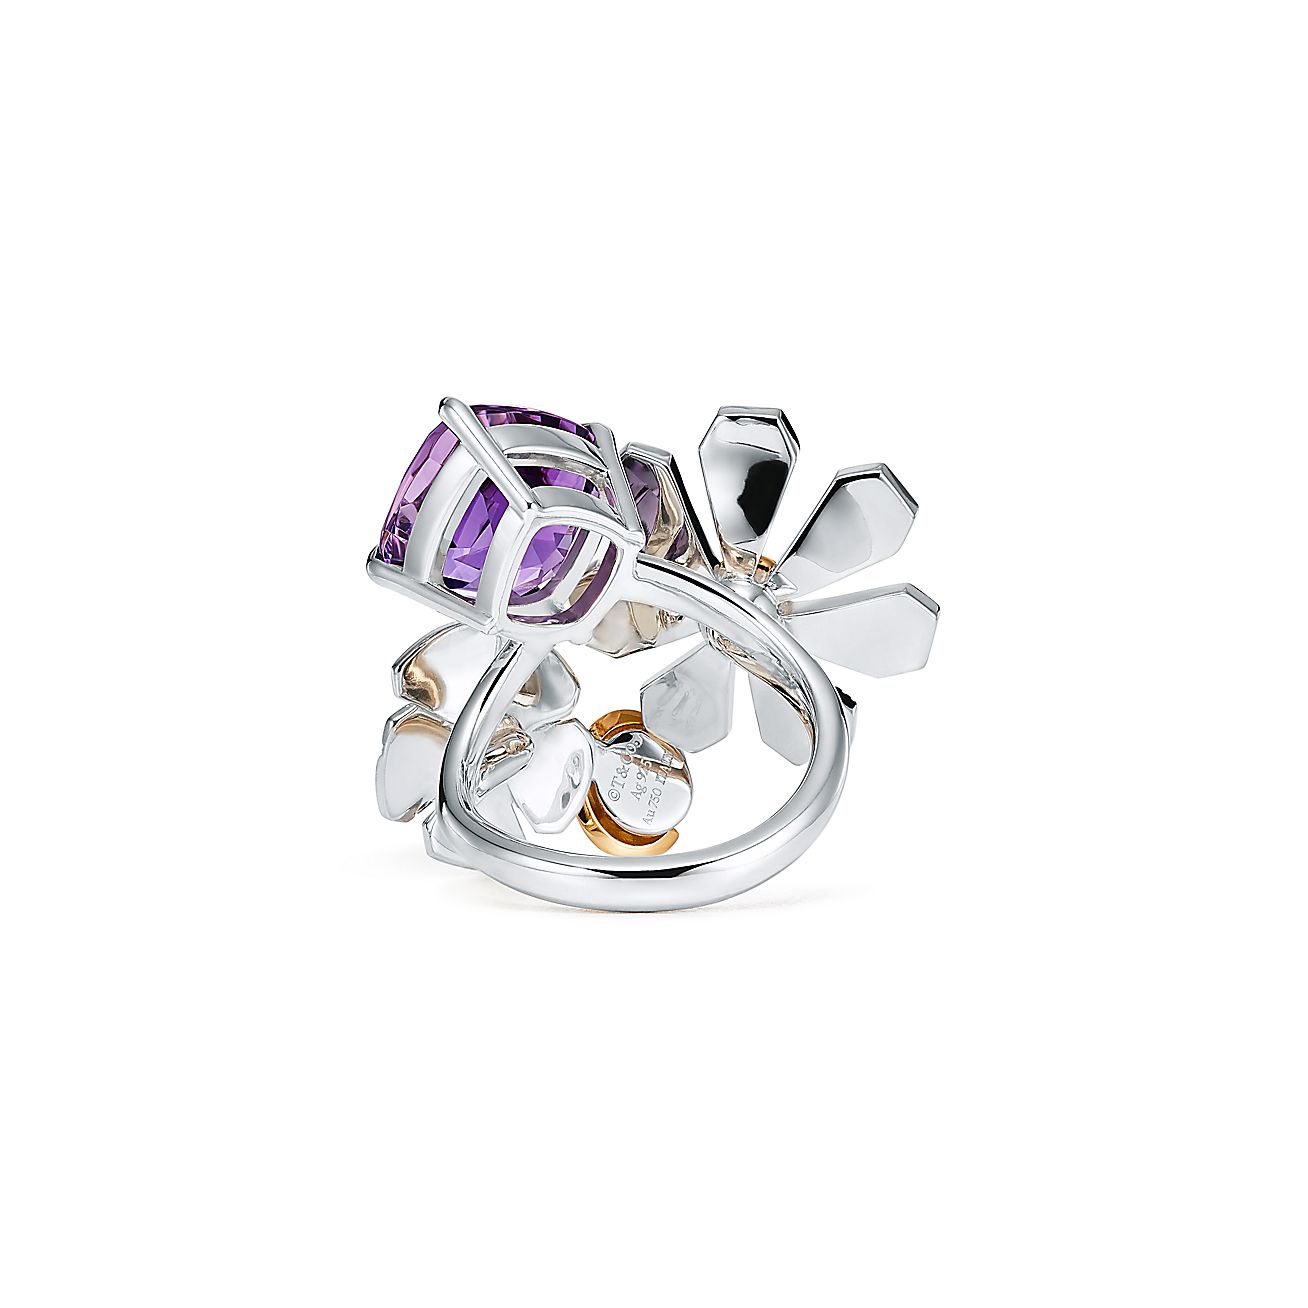 Return to Tiffany® Love Bugs Amethyst Ladybug Flower Ring in Sterling Silver and 18k Gold